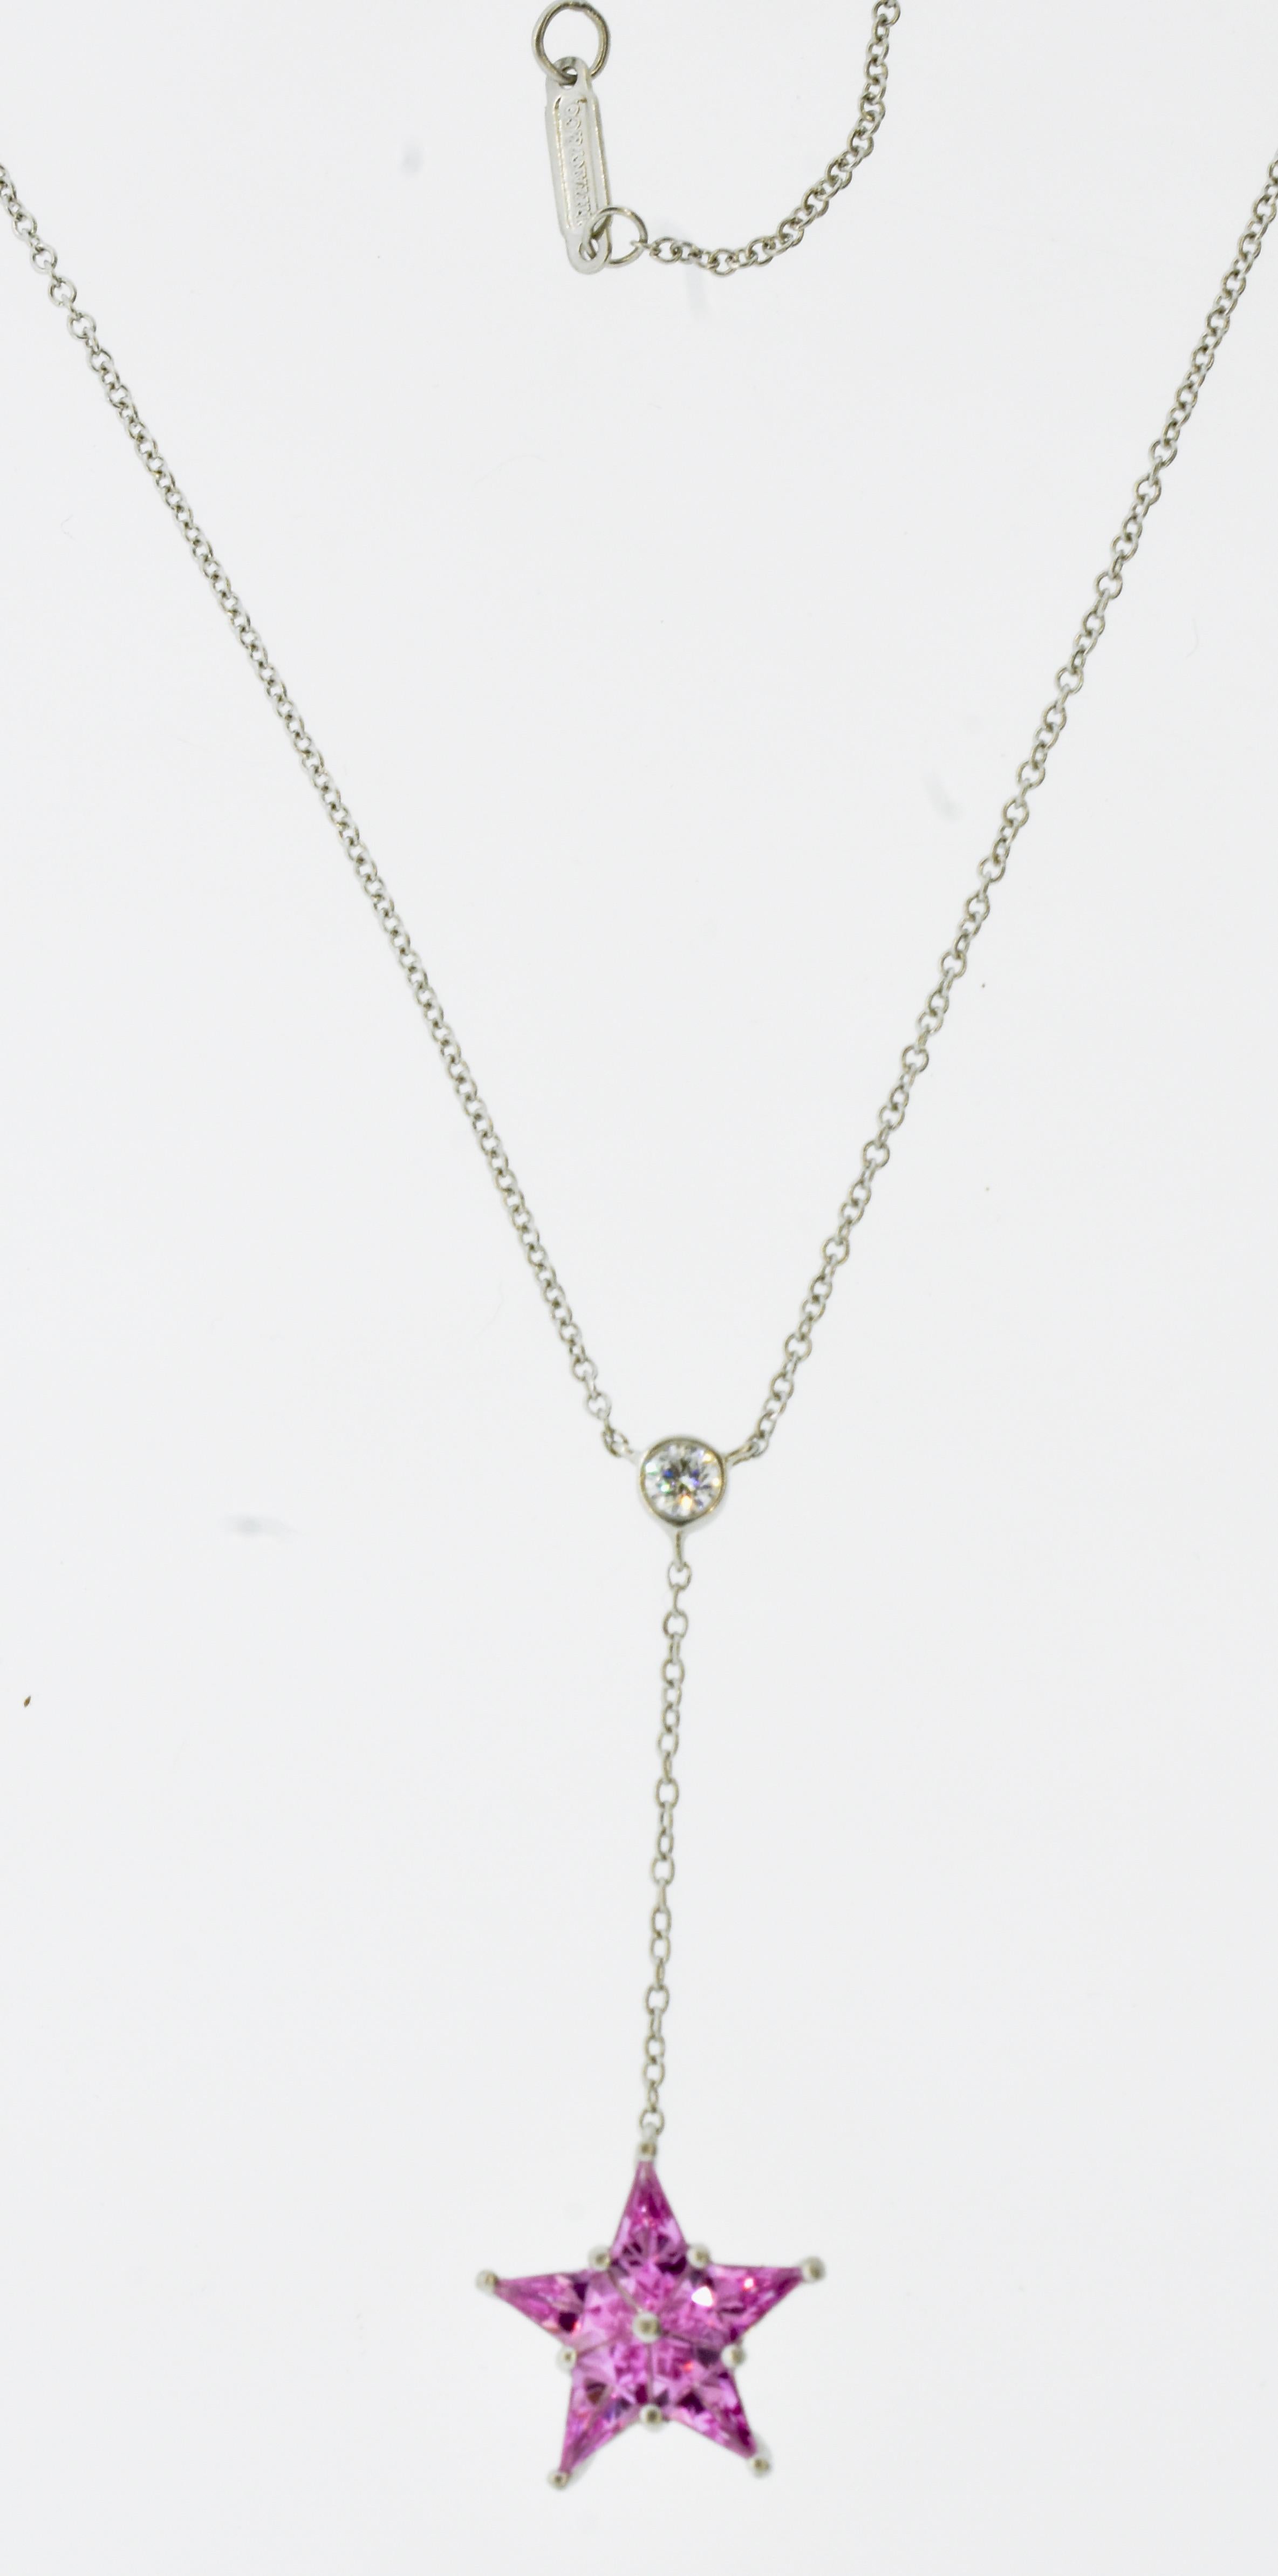 Tiffany necklace terminating with a pendant of pink sapphires set in a star motif.  The platinum  star pendant is suspended from a fine, collet set diamond, weighing approximately .10 cts., near colorless, (G) and very slightly included (VS).  The 